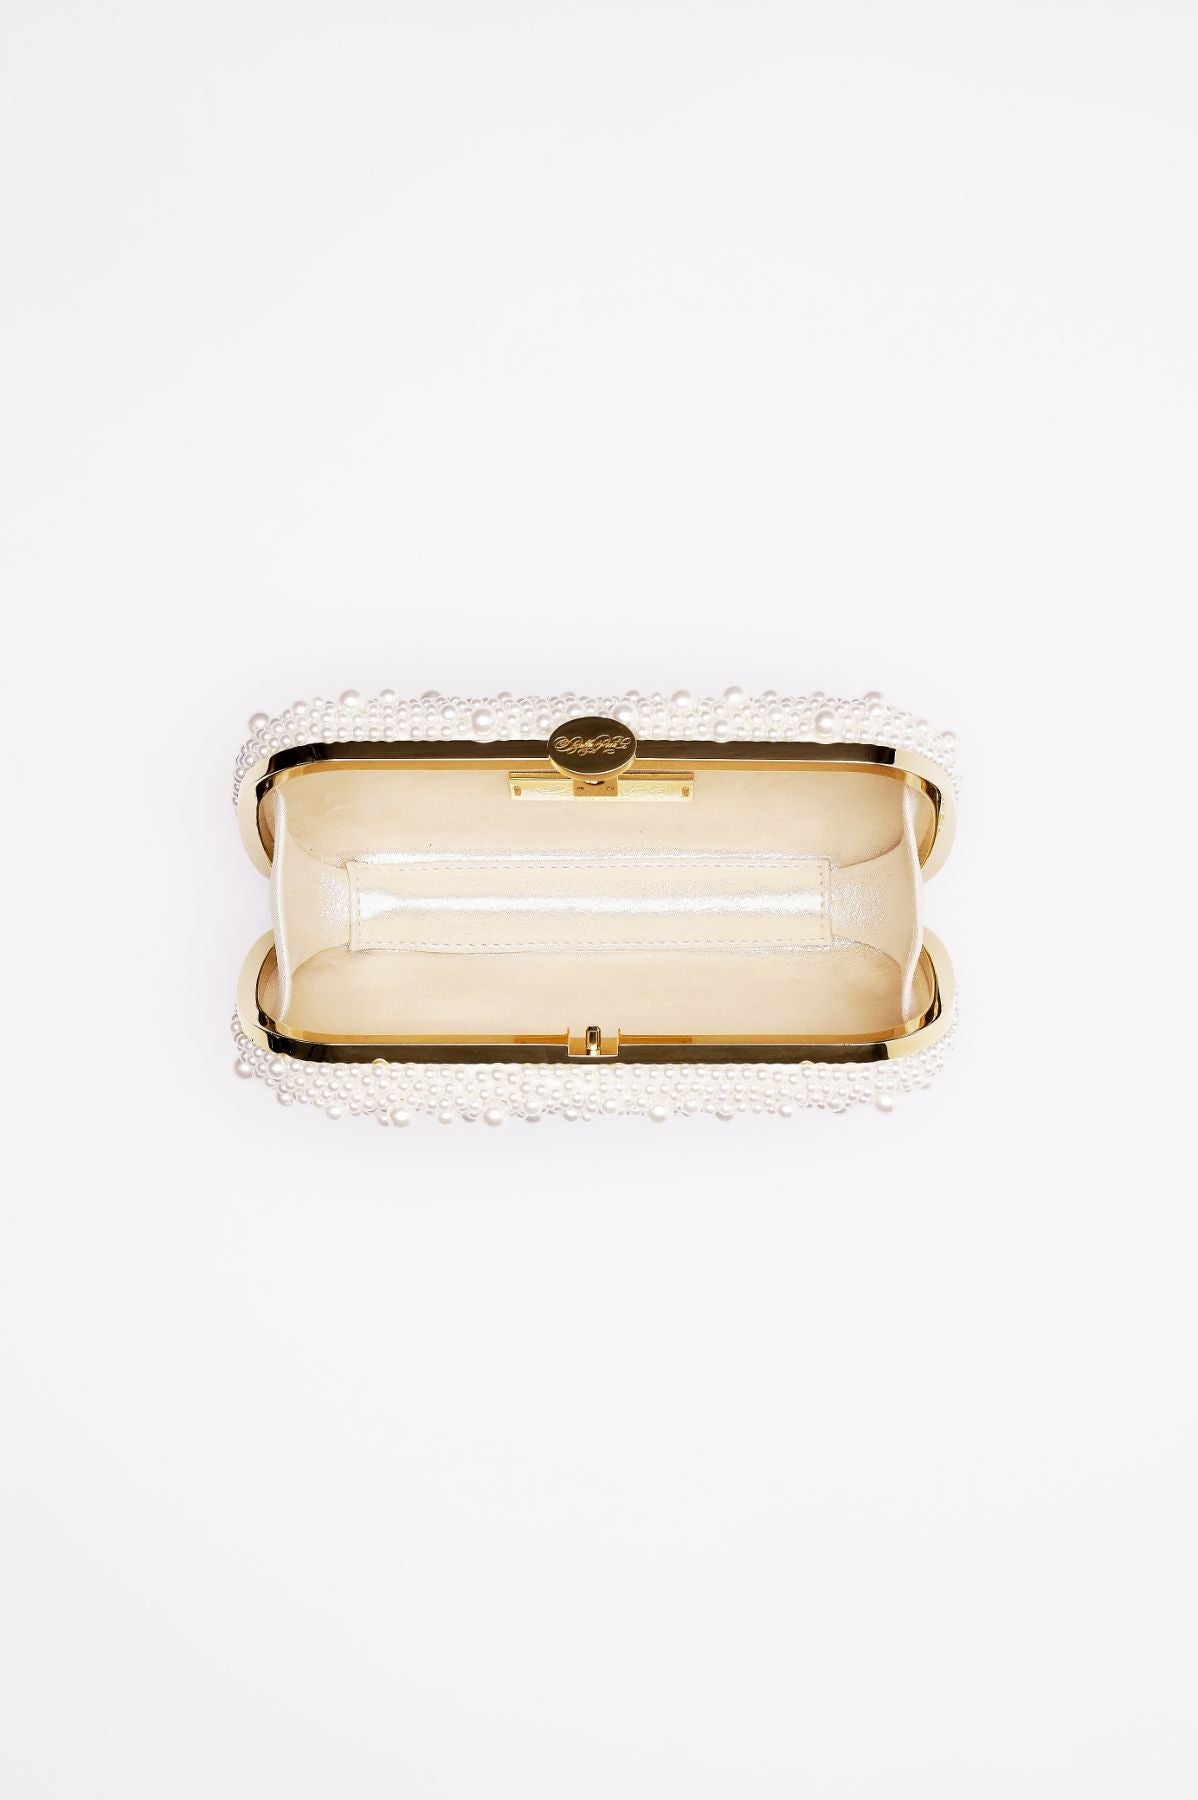 An open empty Bella Rosa Collection bridal clutch purse with a metallic clasp, viewed from above.